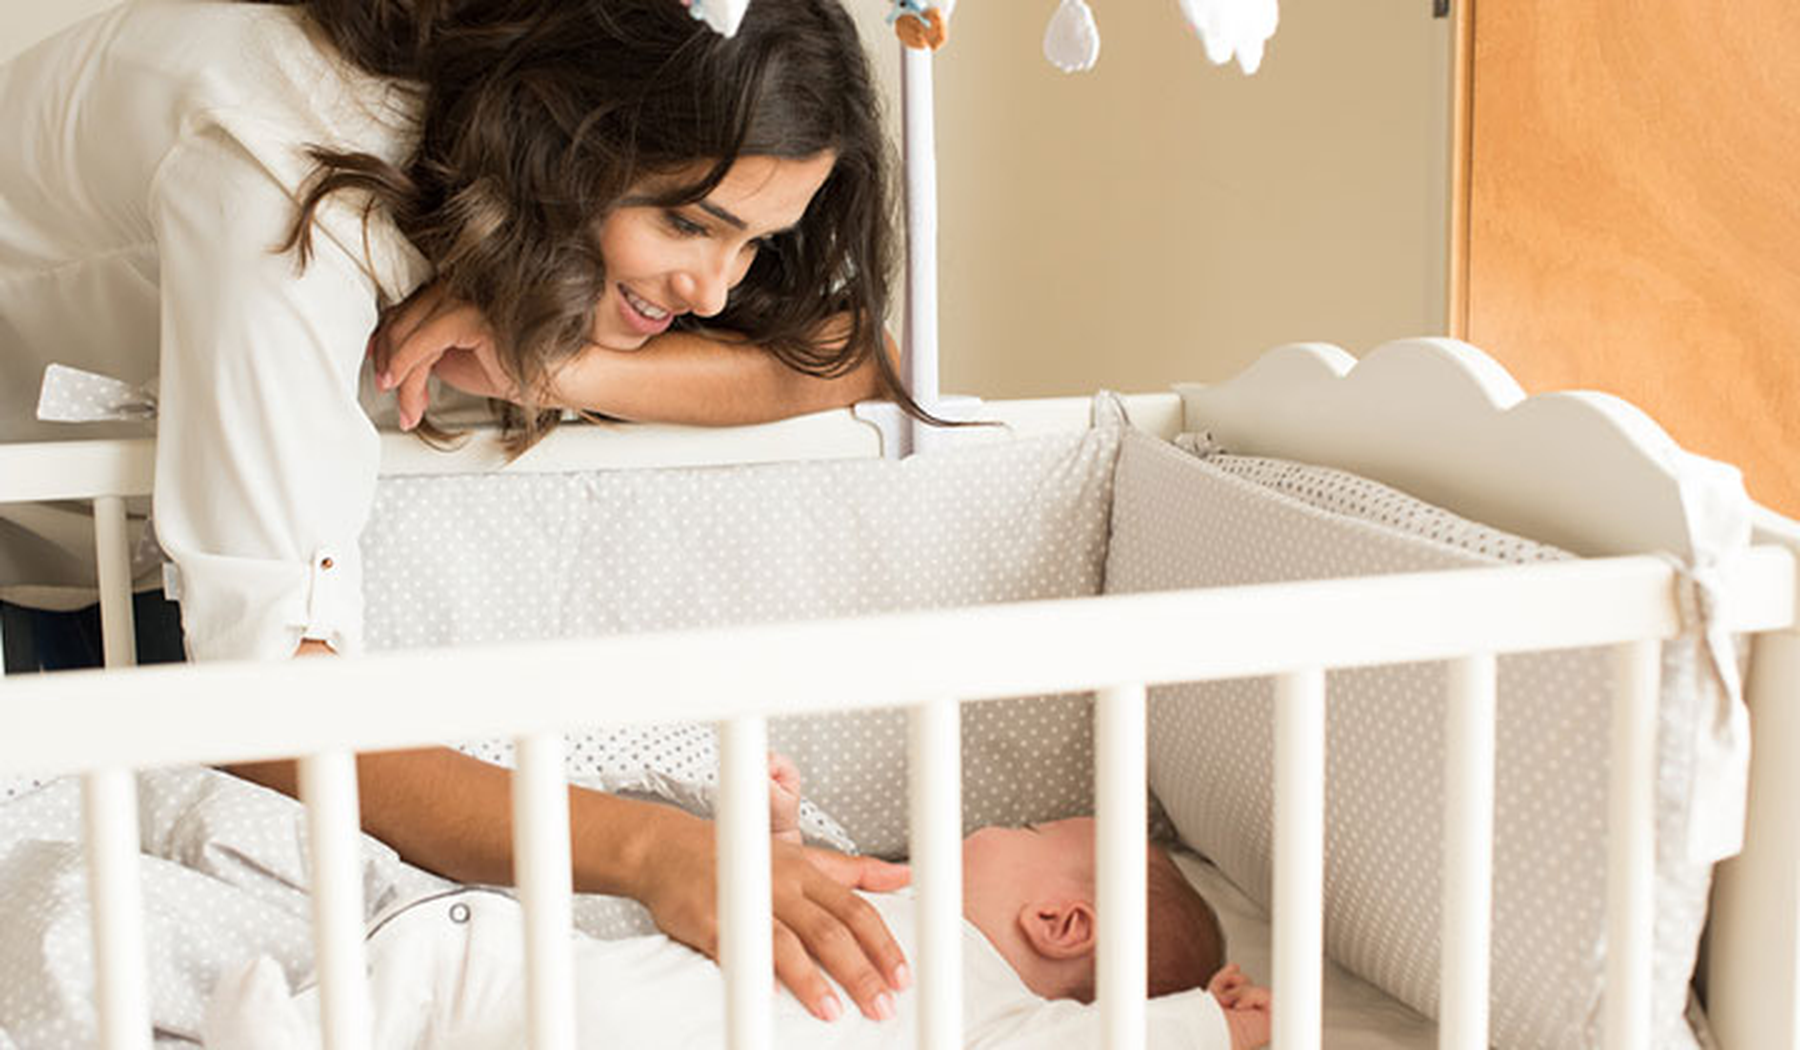 Woman smiling over sleeping baby in a crib